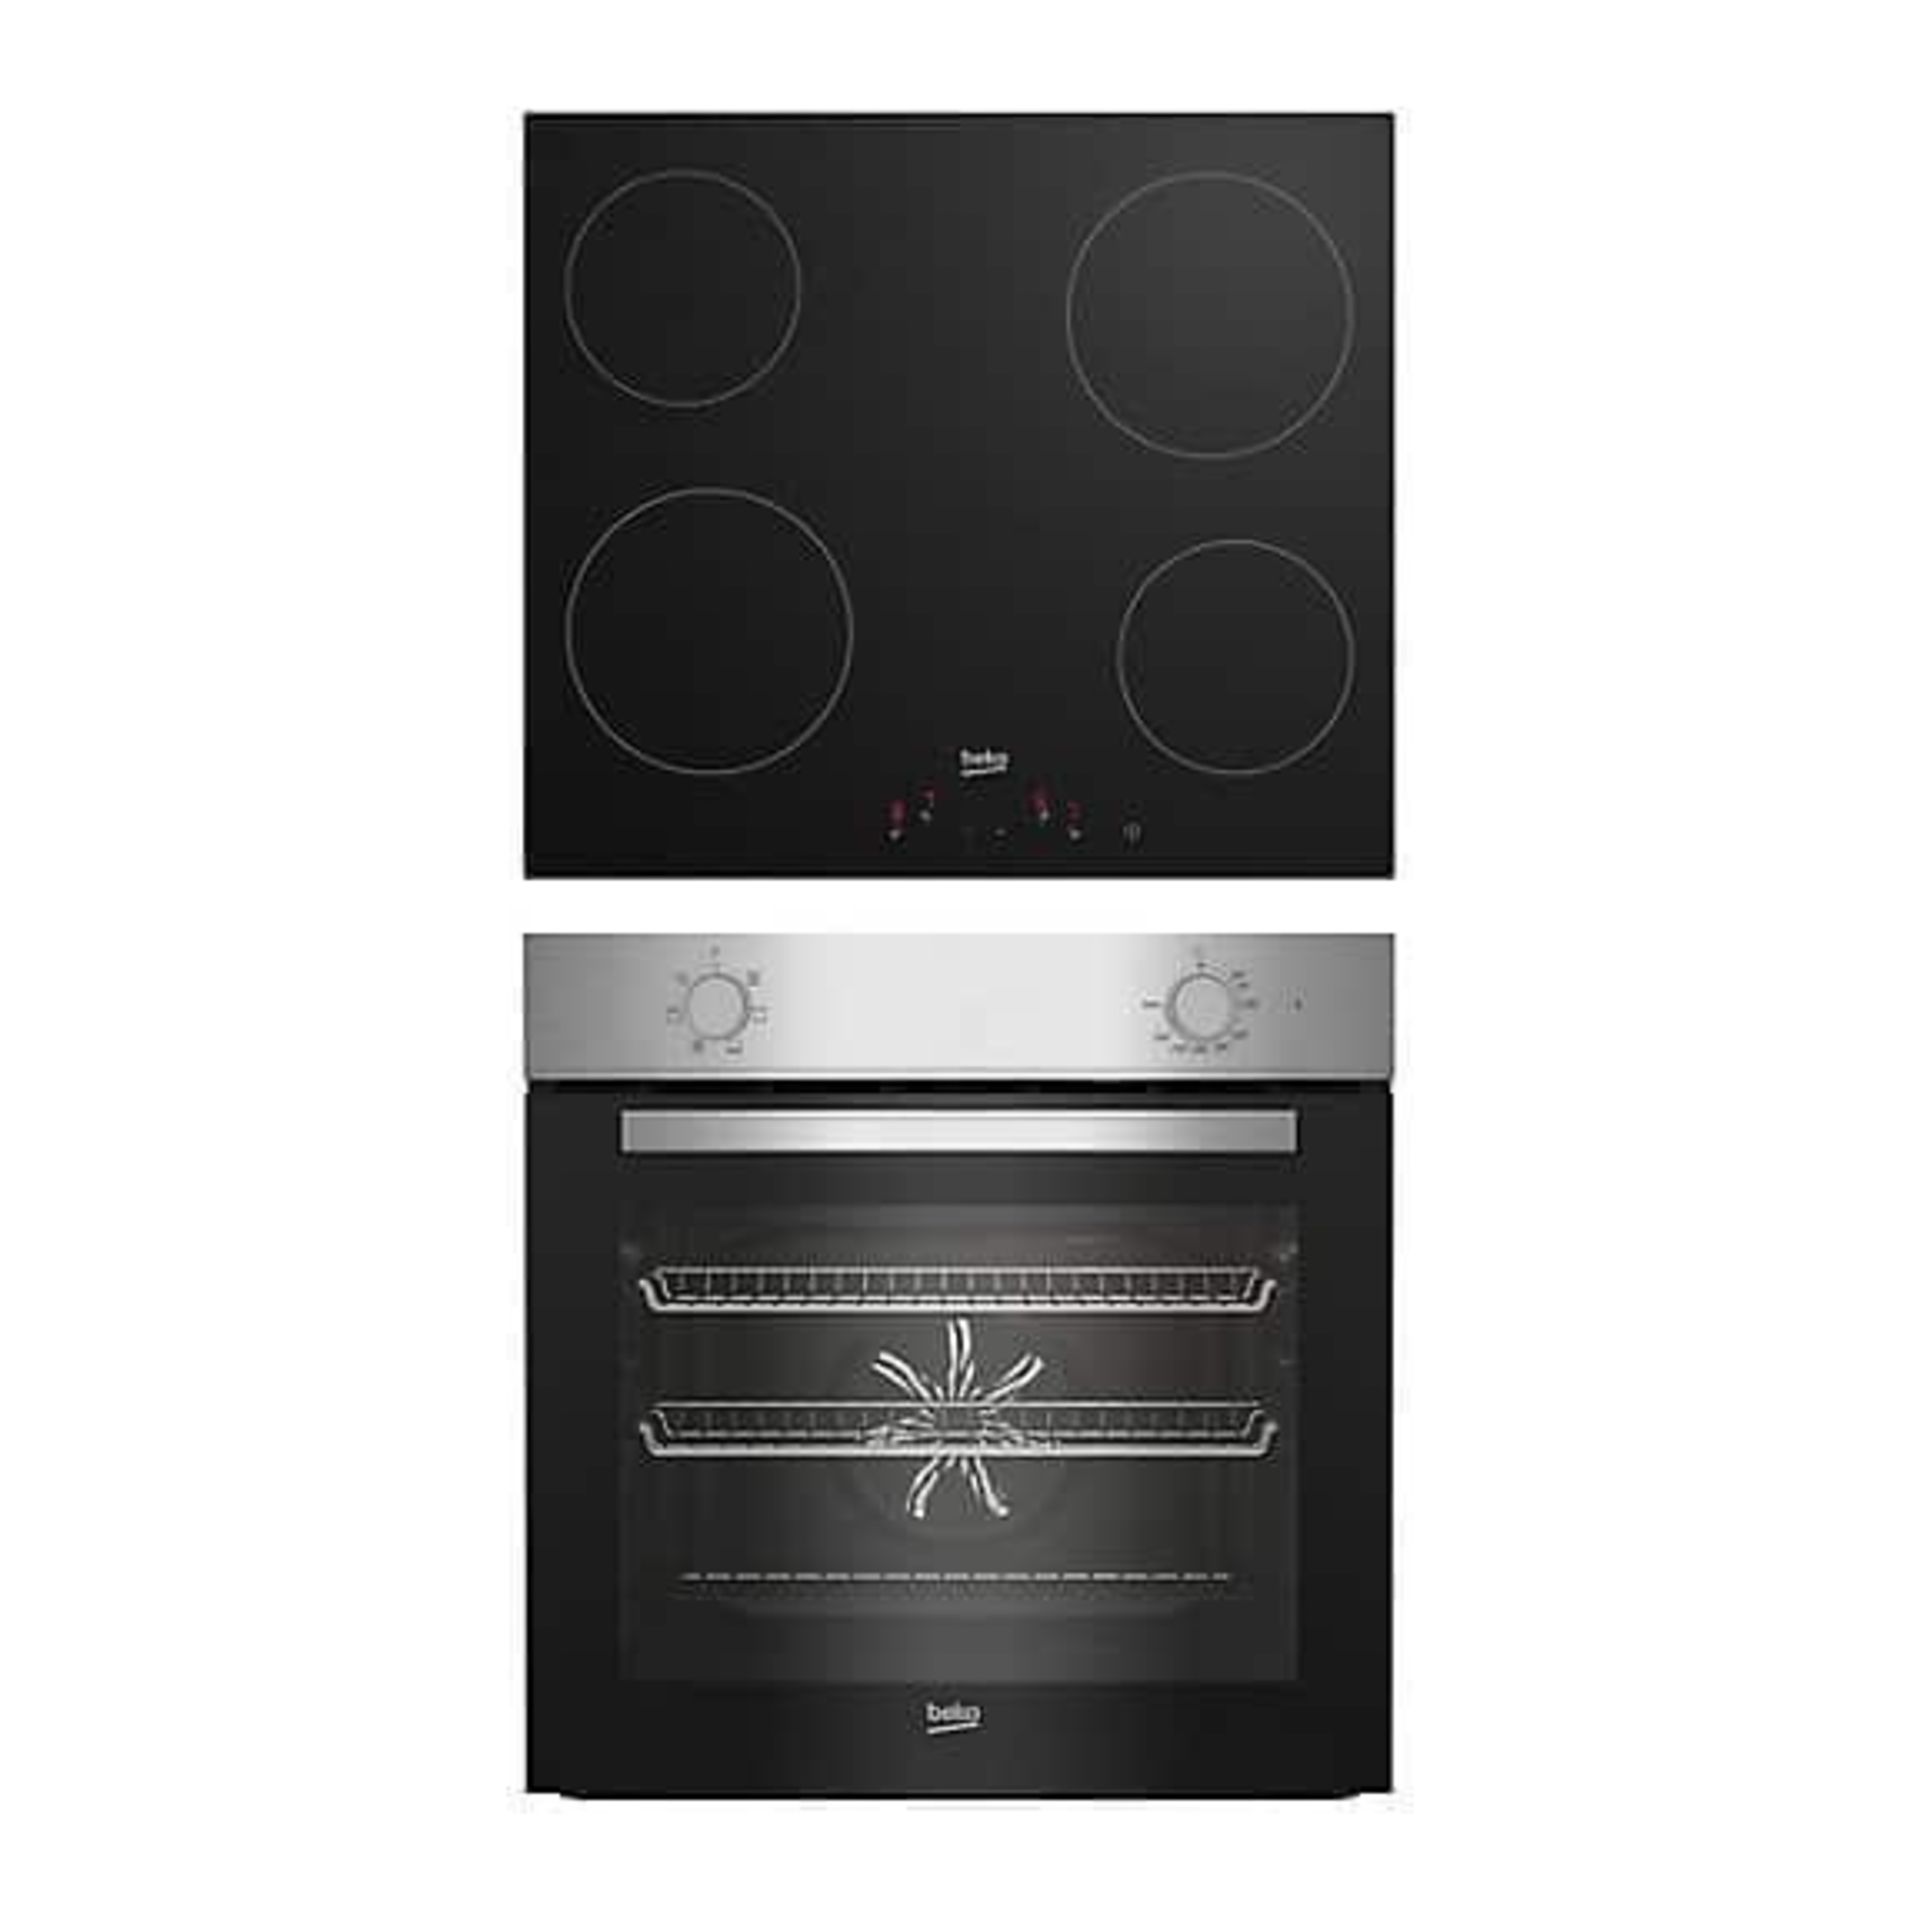 Beko Integrated AeroPerfect Multi-function Oven Hob Pack QBSE222 - SR48. Brand New-outer box torn or